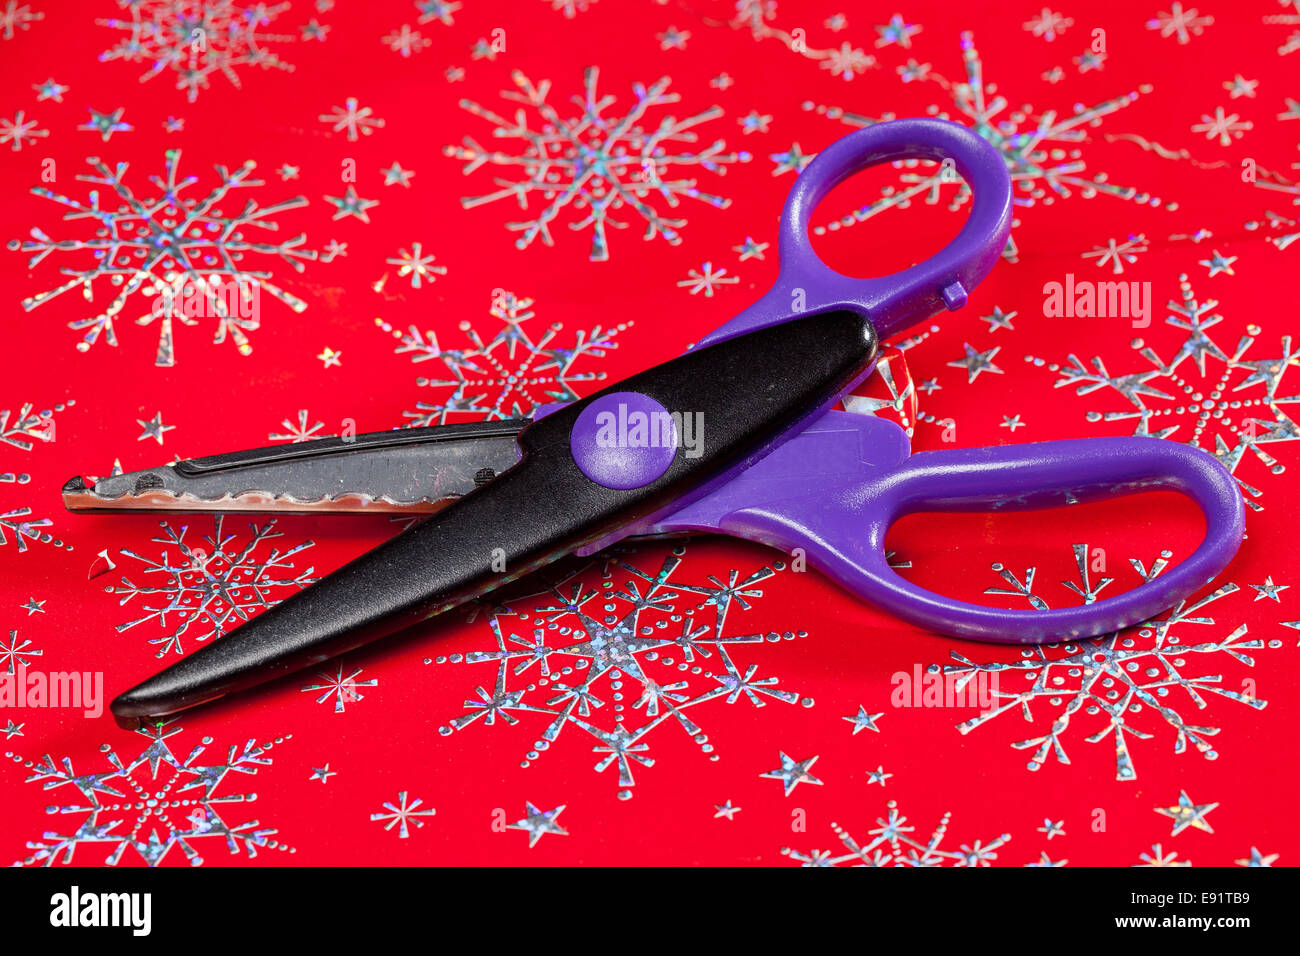 Pinking shears or scissors cutting Stock Photo